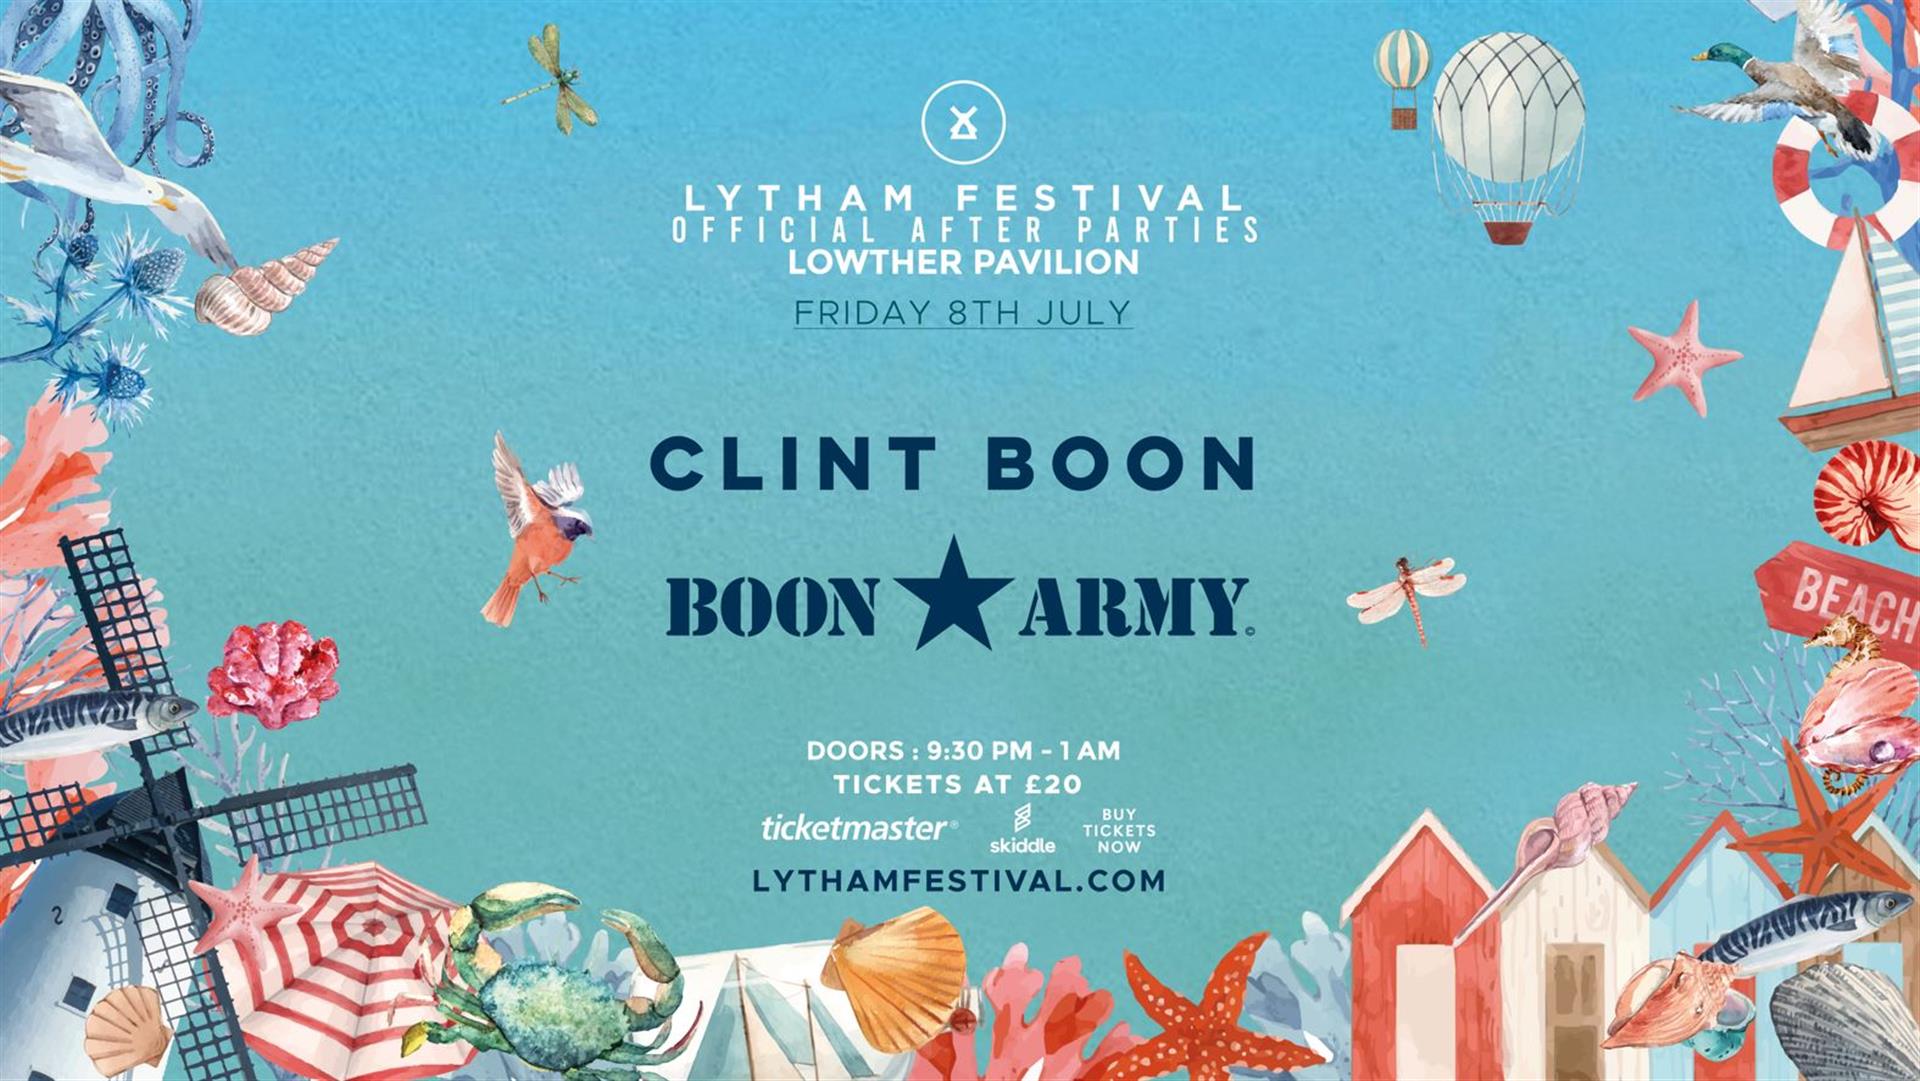 Lytham Festival Official After Parties – Clint Boon - Lowther Pavilion